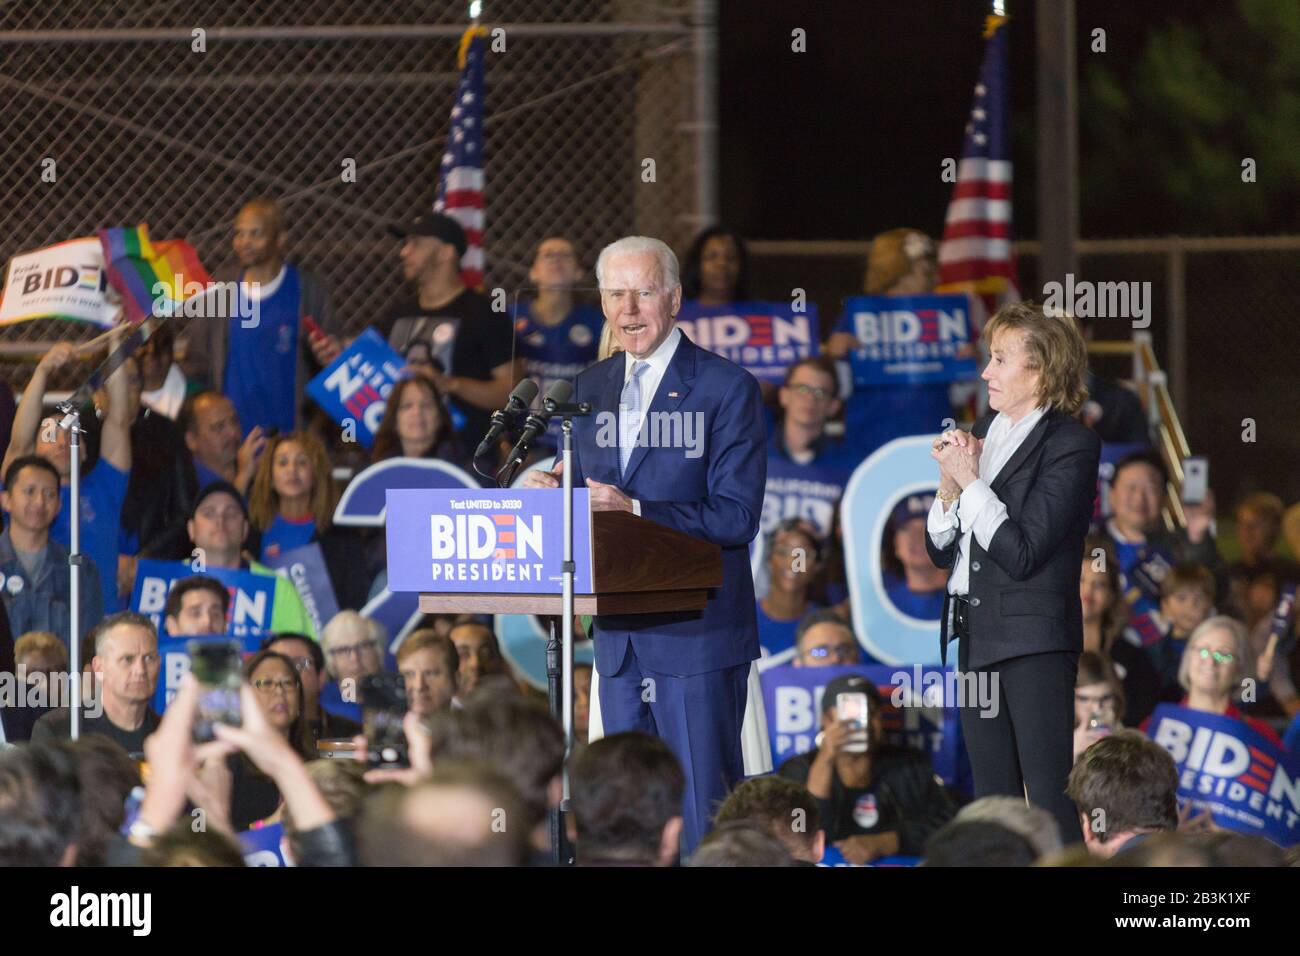 Los Angeles, United States. 03rd Mar, 2020. BALDWIN HILLS, LOS ANGELES, CALIFORNIA, USA - MARCH 03: Former Vice President Joe Biden, 2020 Democratic presidential candidate, left, speaks while his sister Valerie Biden, right, stands during his Super Tuesday Los Angeles Rally held at the Baldwin Hills Recreation Center on March 3, 2020 in Baldwin Hills, Los Angeles, California, United States. (Photo by Rudy Torres/Image Press Agency) Credit: Image Press Agency/Alamy Live News Stock Photo